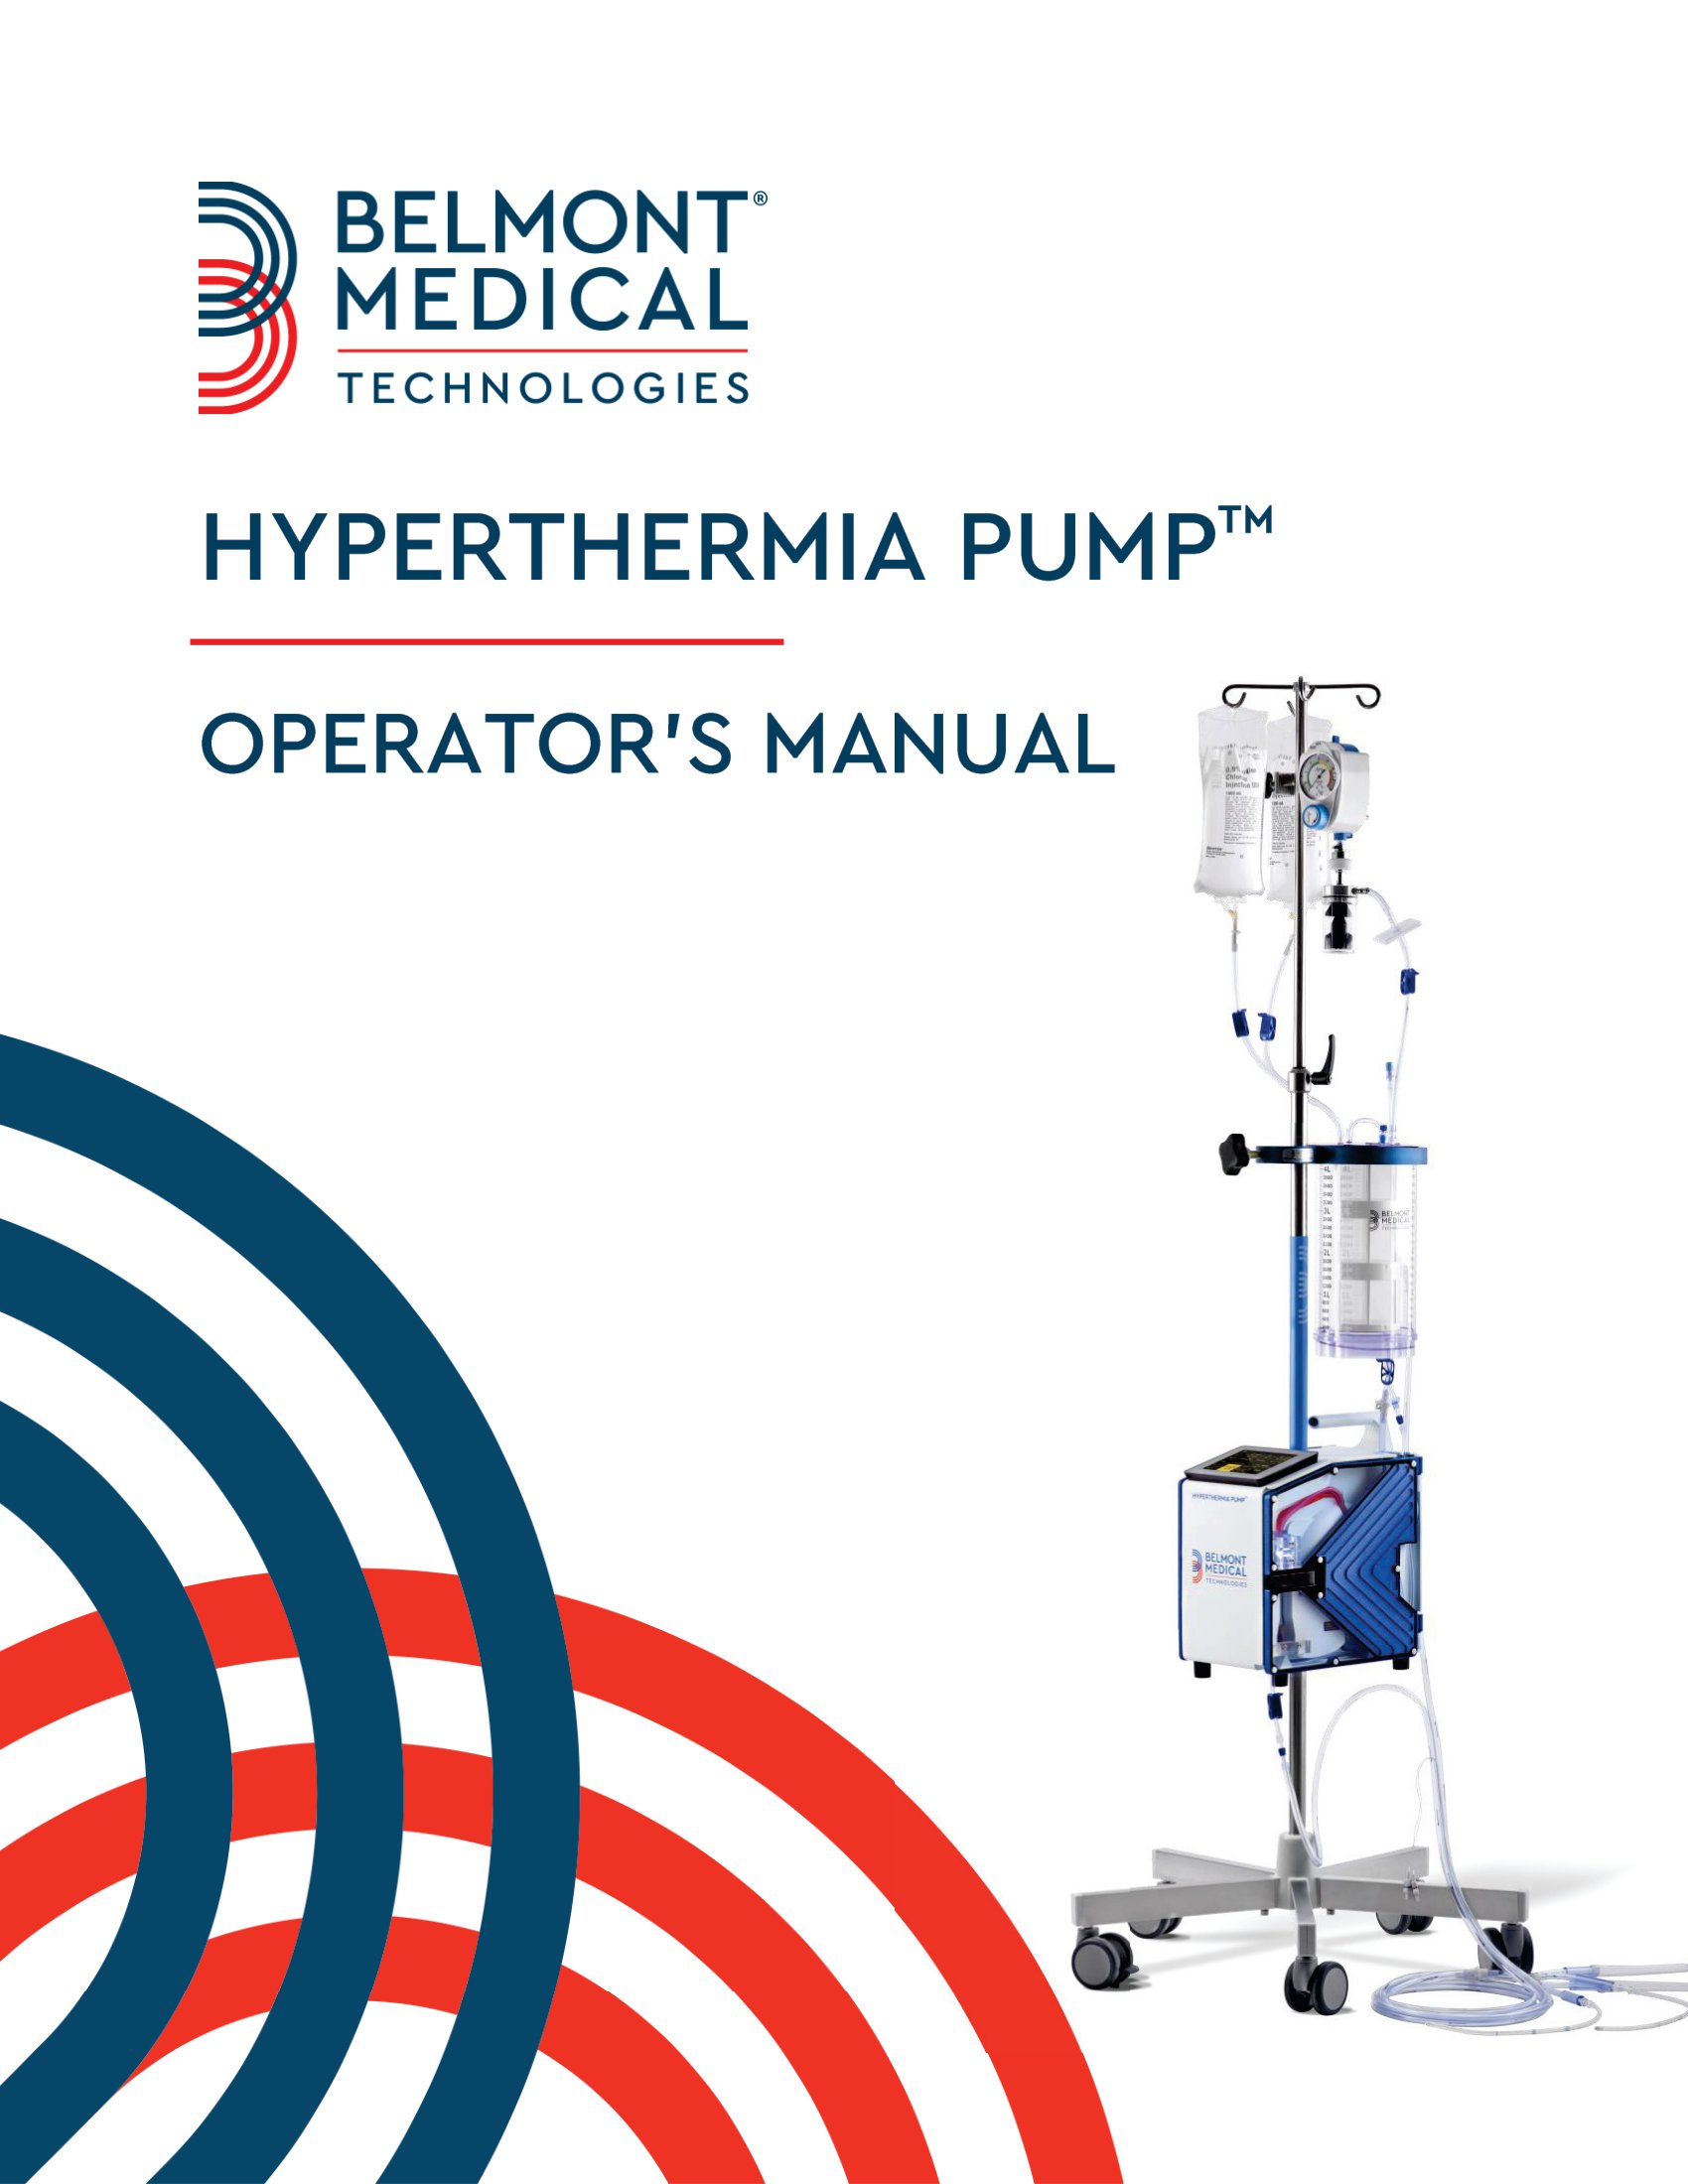 Operators Manual for the Hyperthermia Pump in English